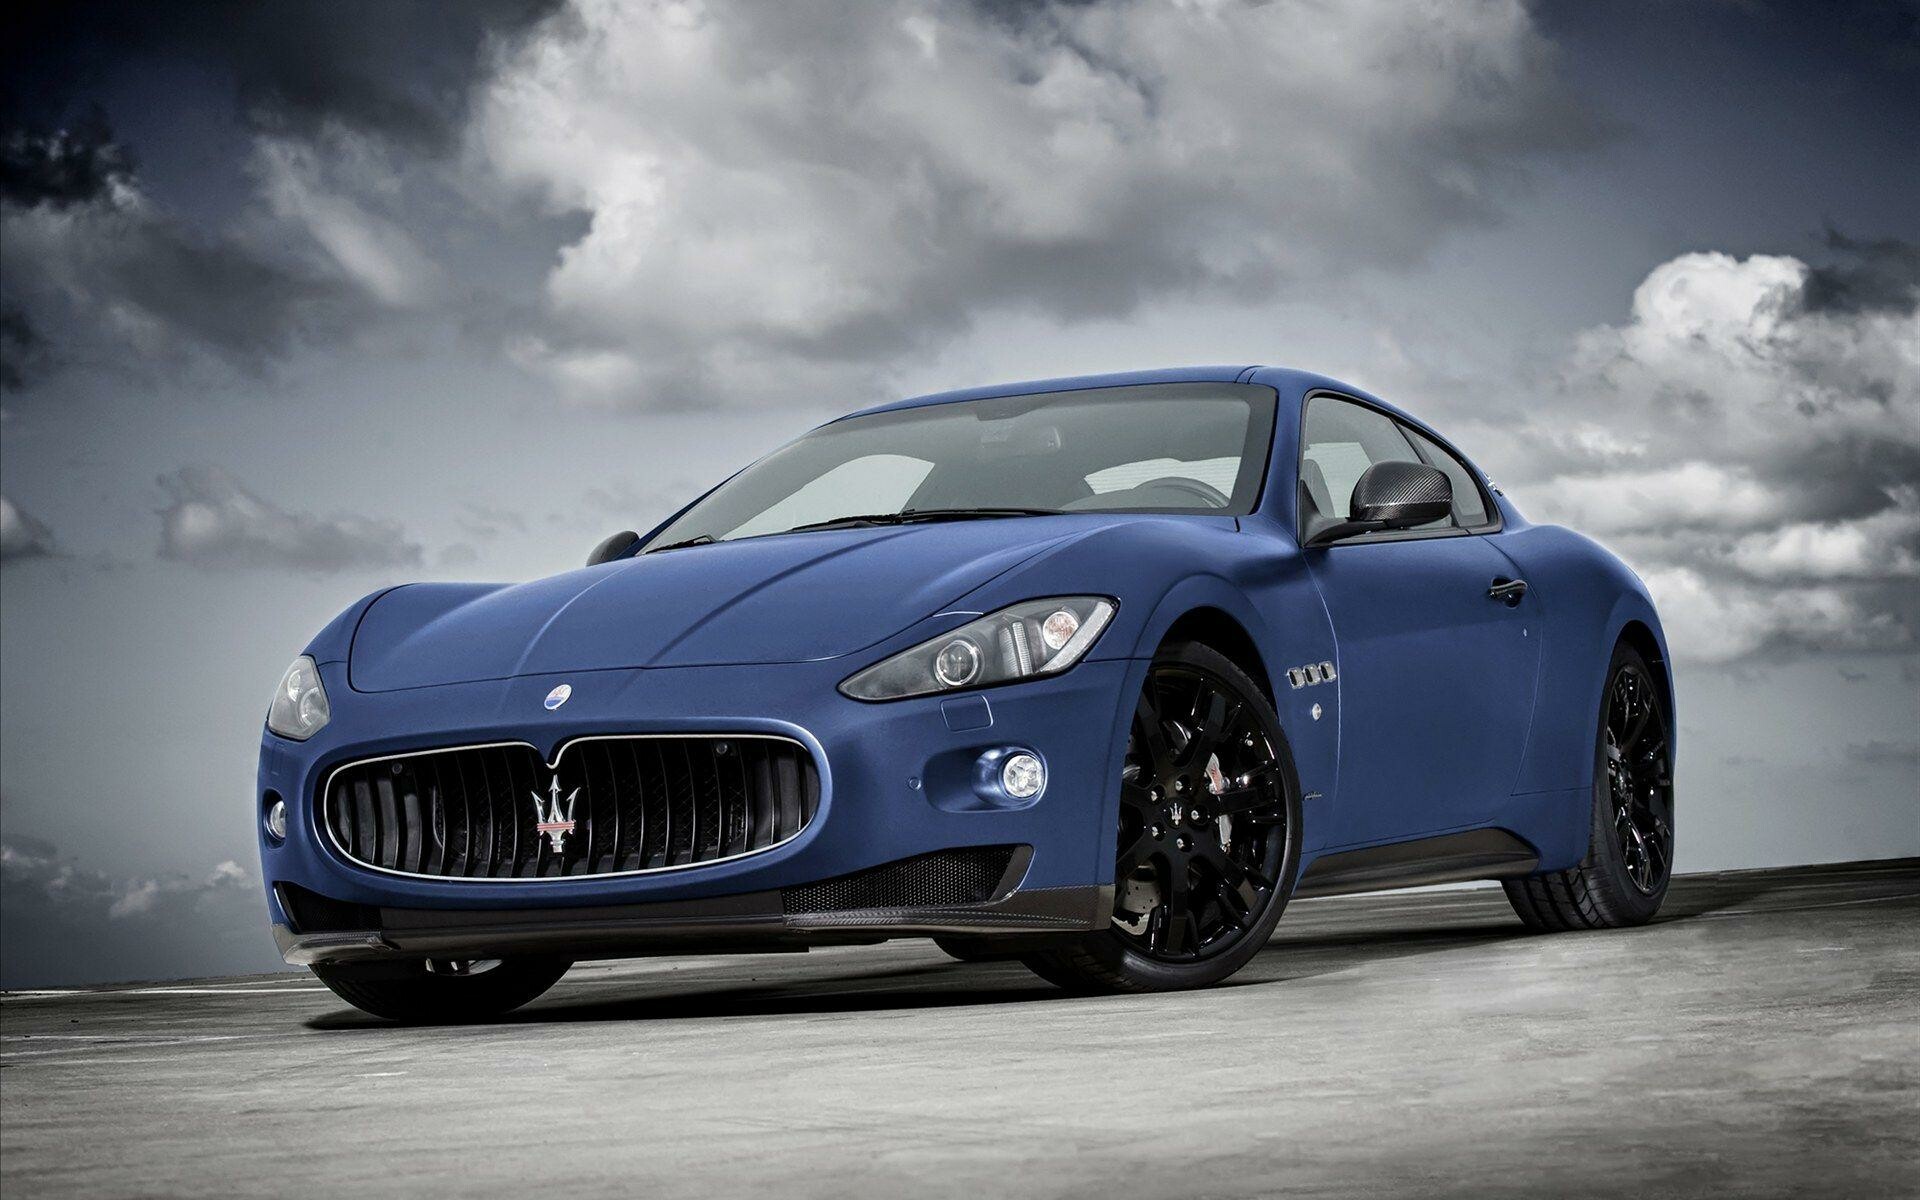 Maserati: Unveiled at the 2007 Geneva Motor Show, the GranTurismo has a drag coefficient of 0.33. 1920x1200 HD Wallpaper.